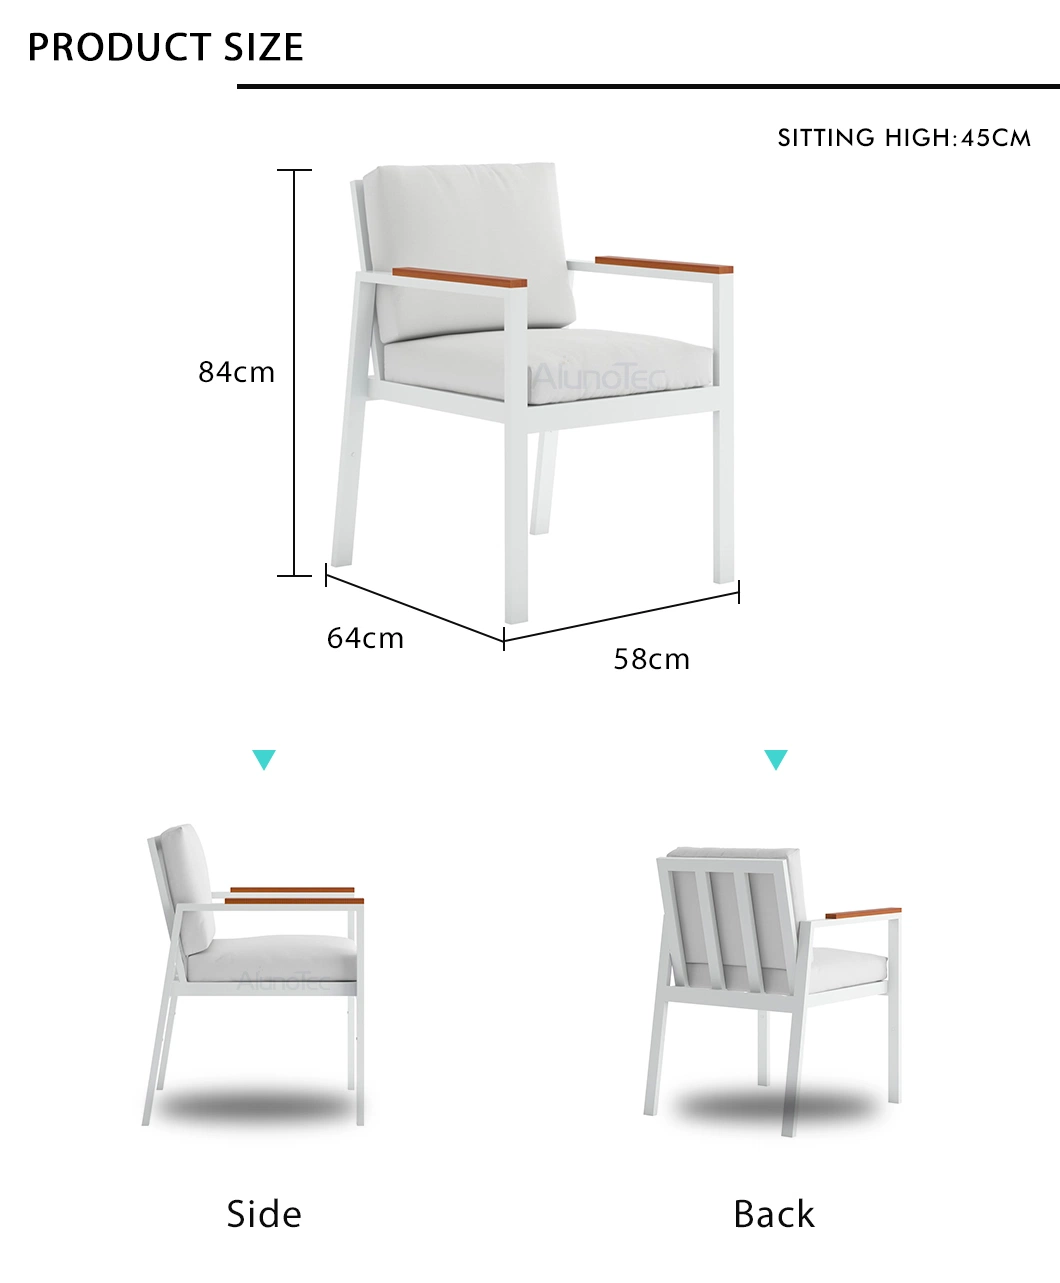 Modern Simple Style Teak Wood Arm Dining Chairs